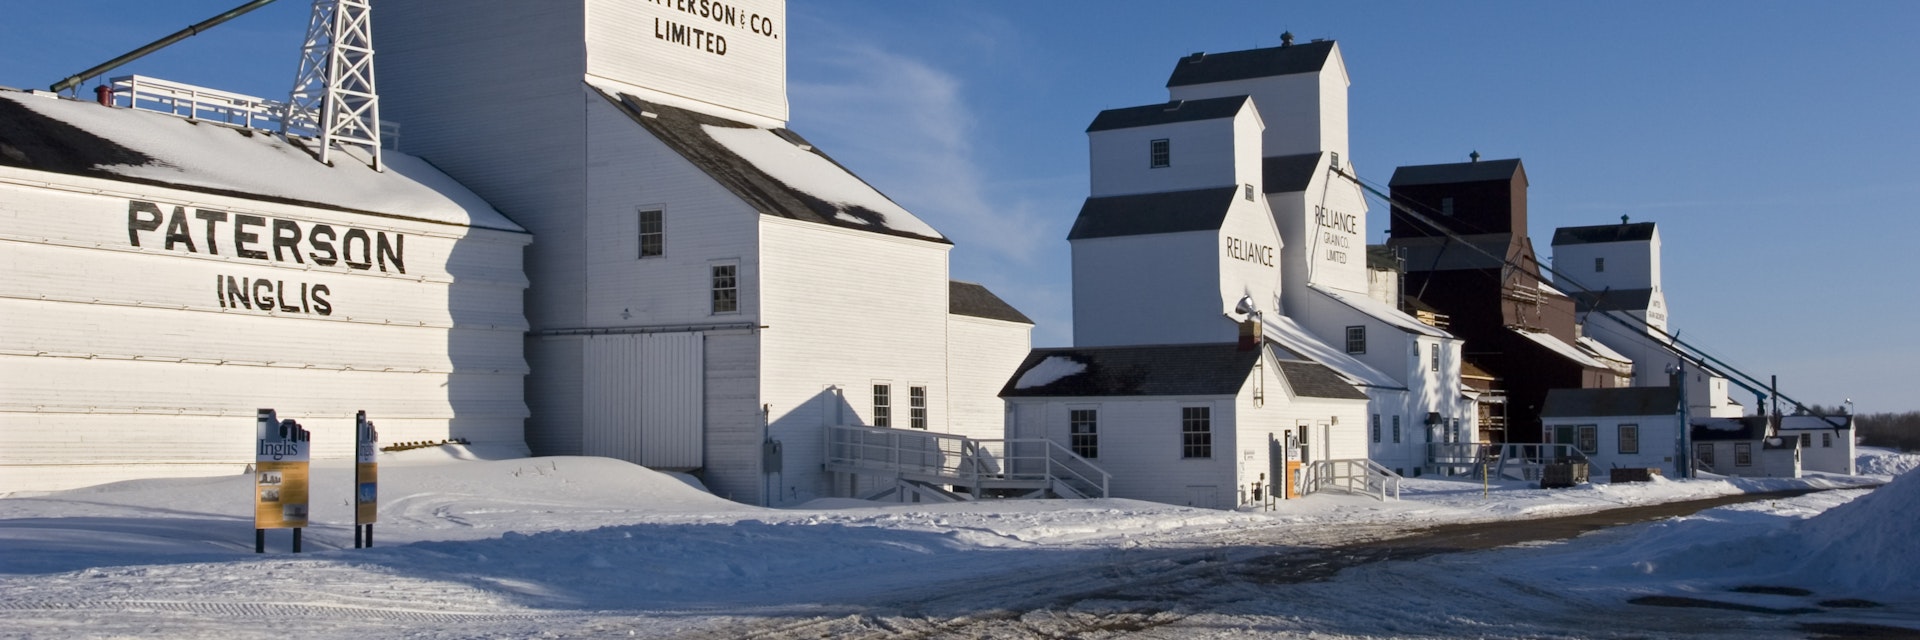 Inglis Grain Elevators National Historic Site, the best remaining example in Canada of a vintage grain elevator row.